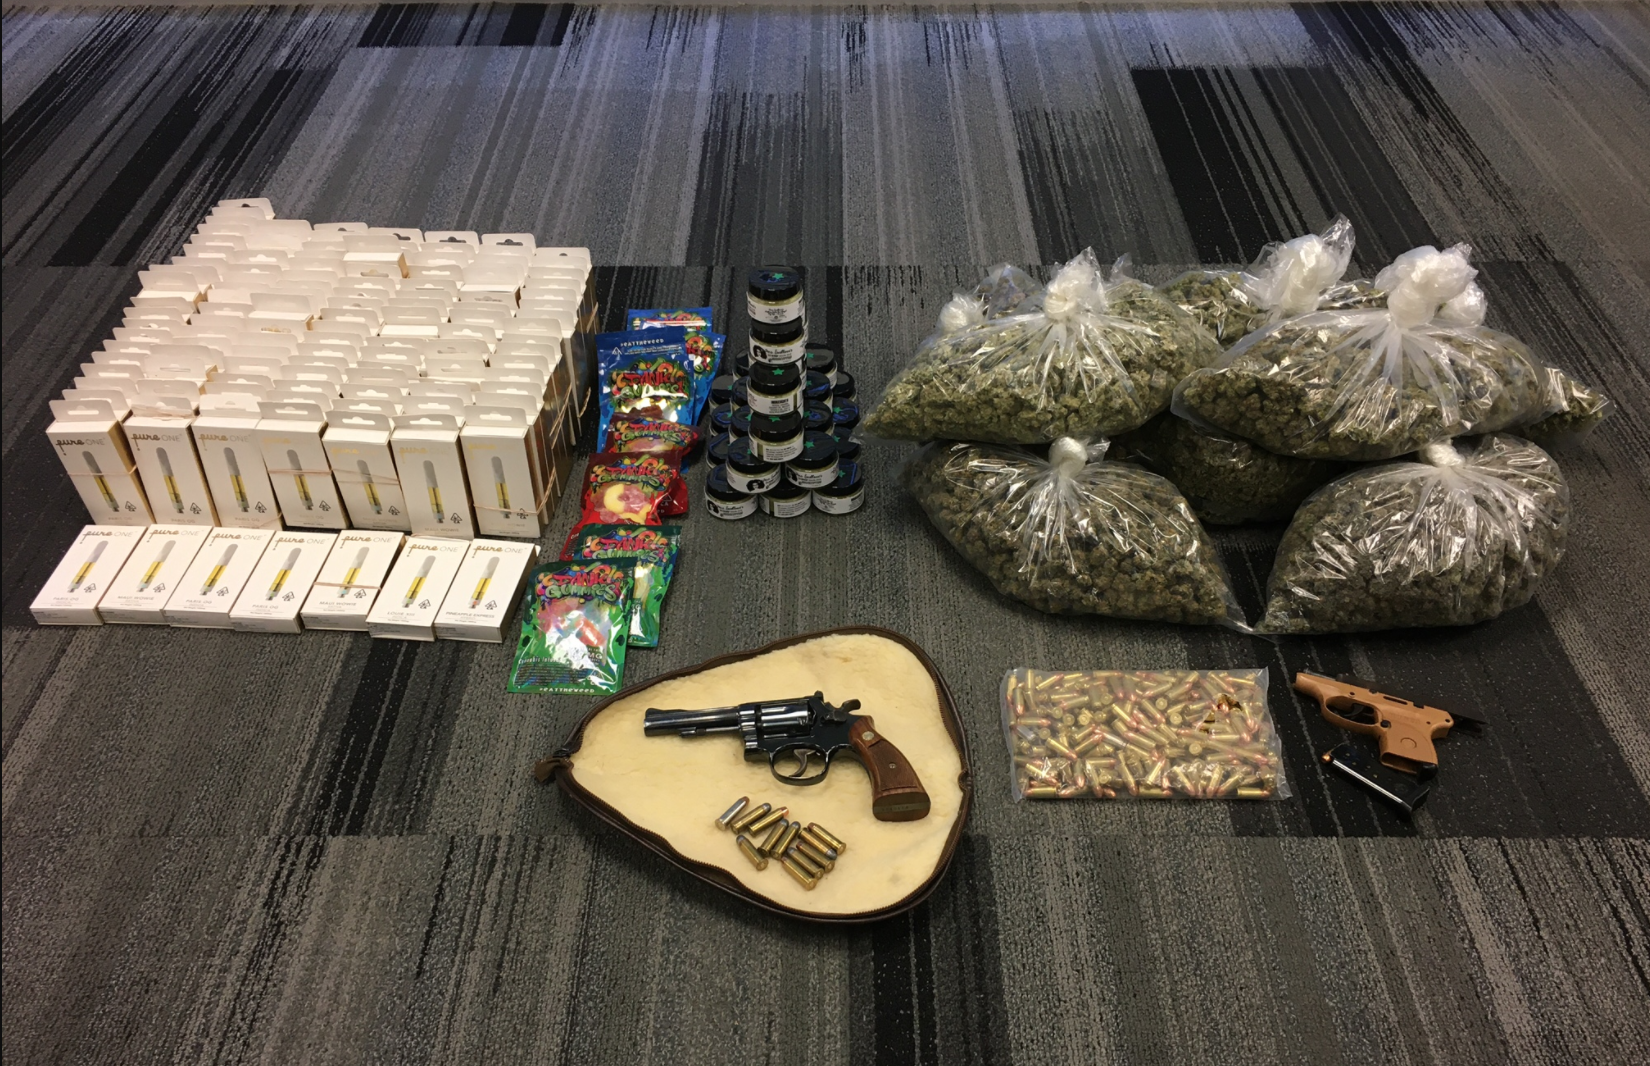 Santa Maria man facing felony charges for illegal cannabis operation